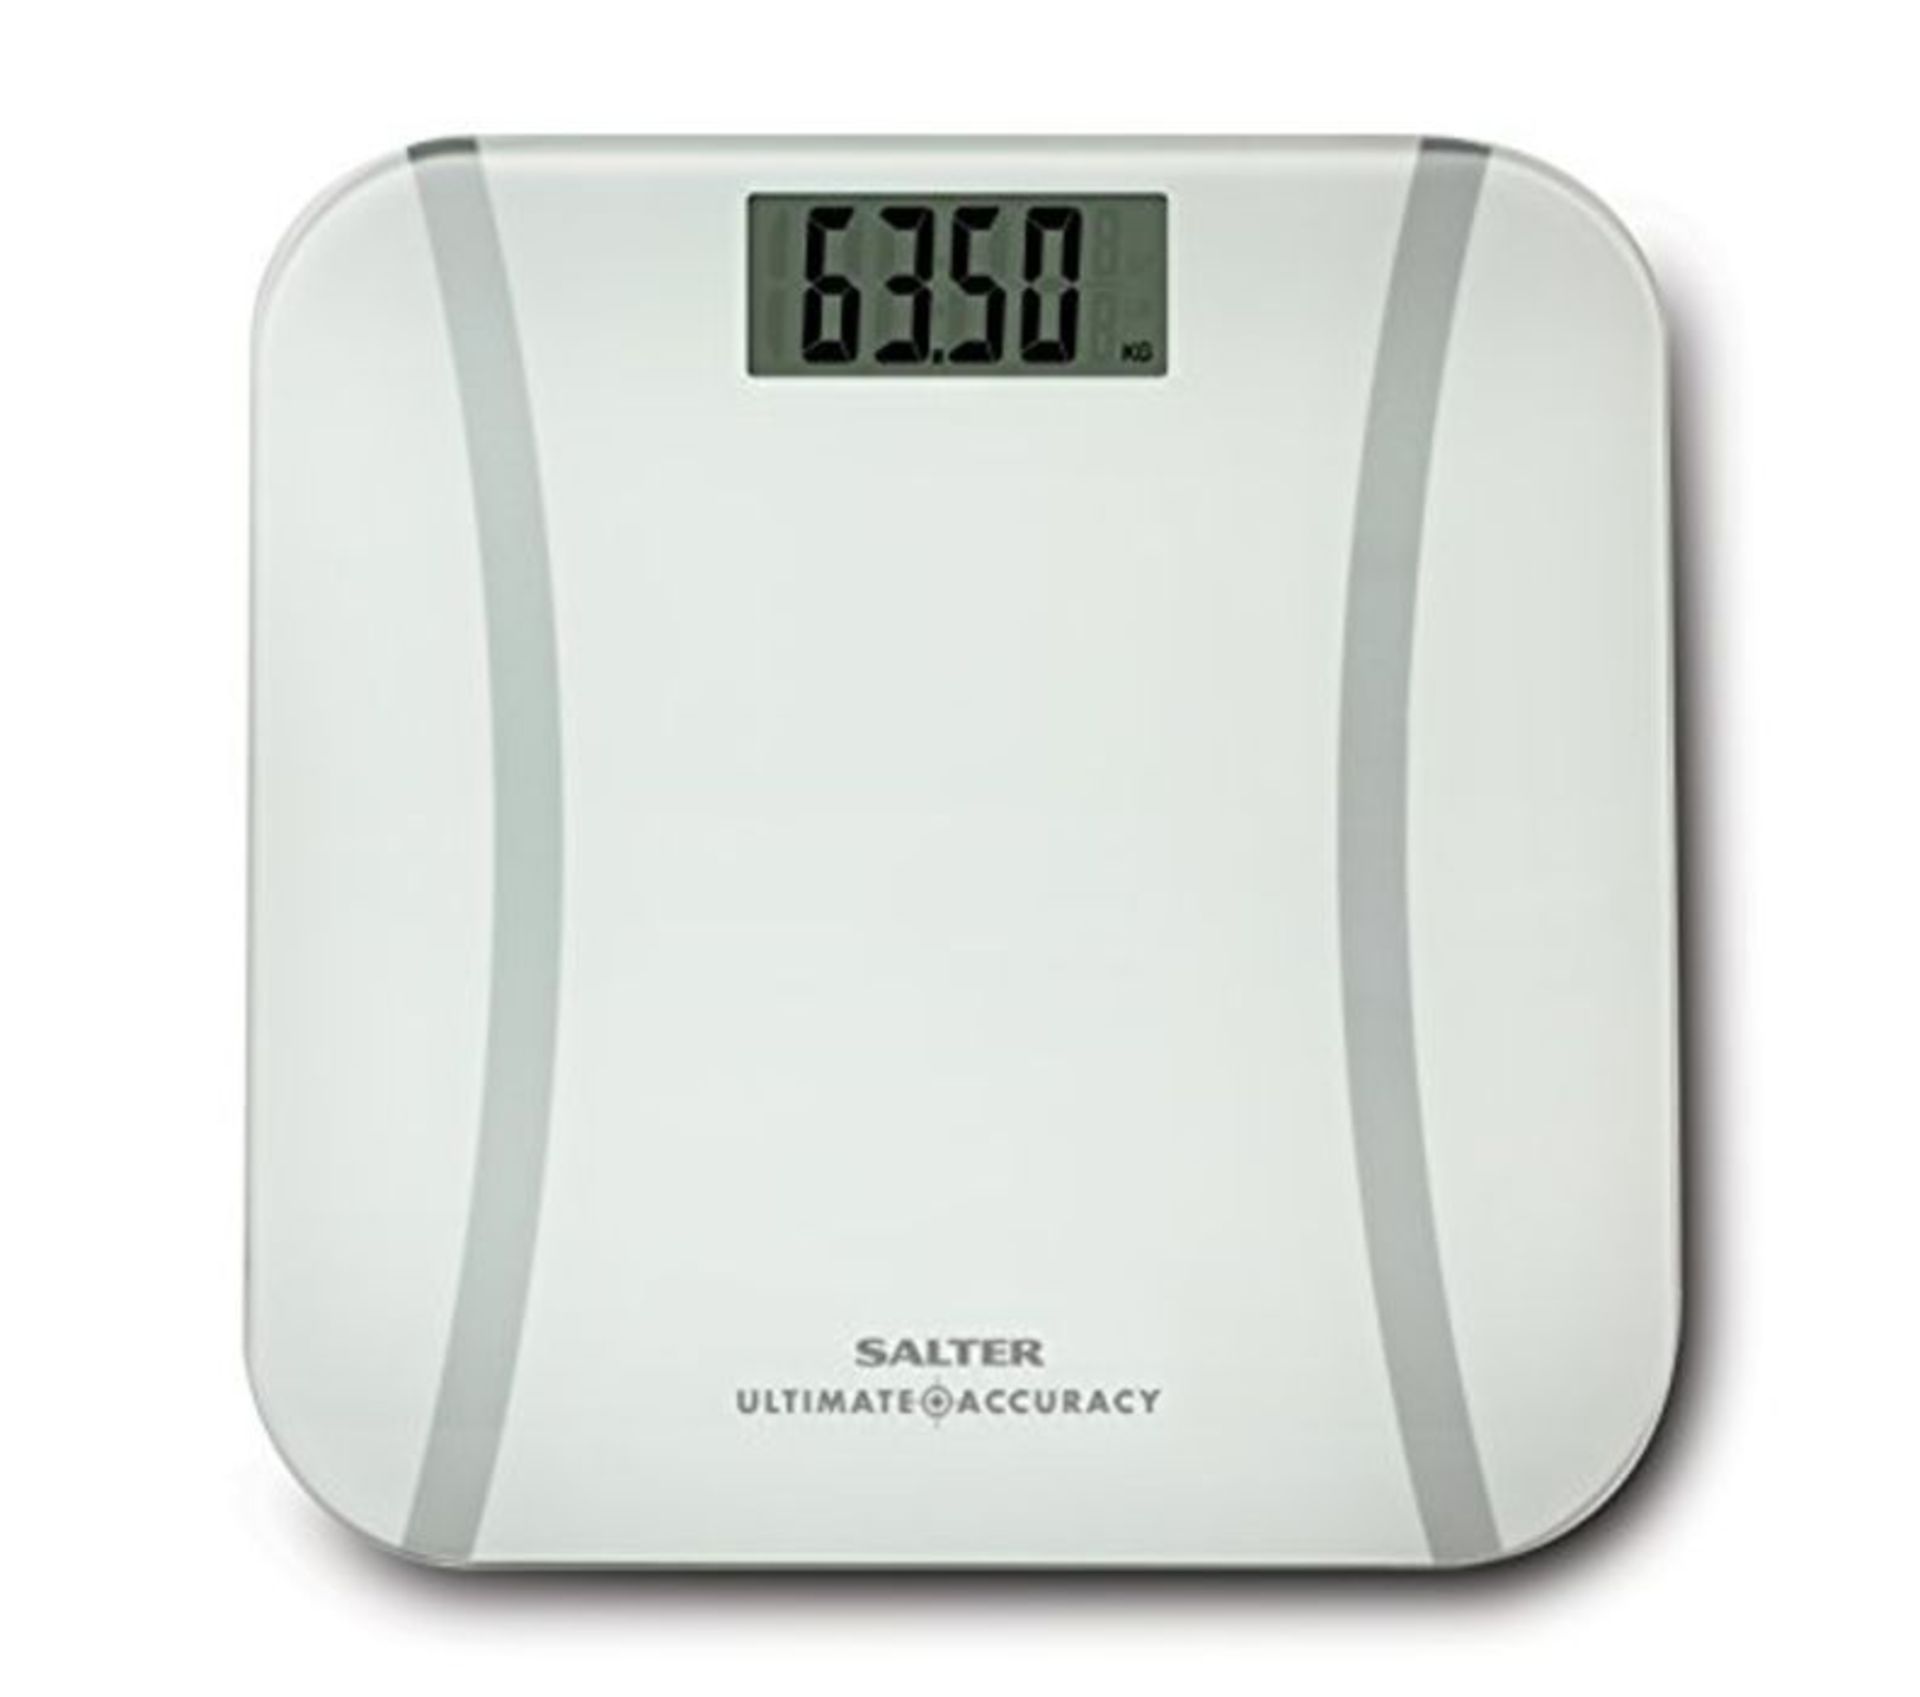 Salter Digital Bathroom Scales with Ultimate Accuracy Technology and Toughened Glass (